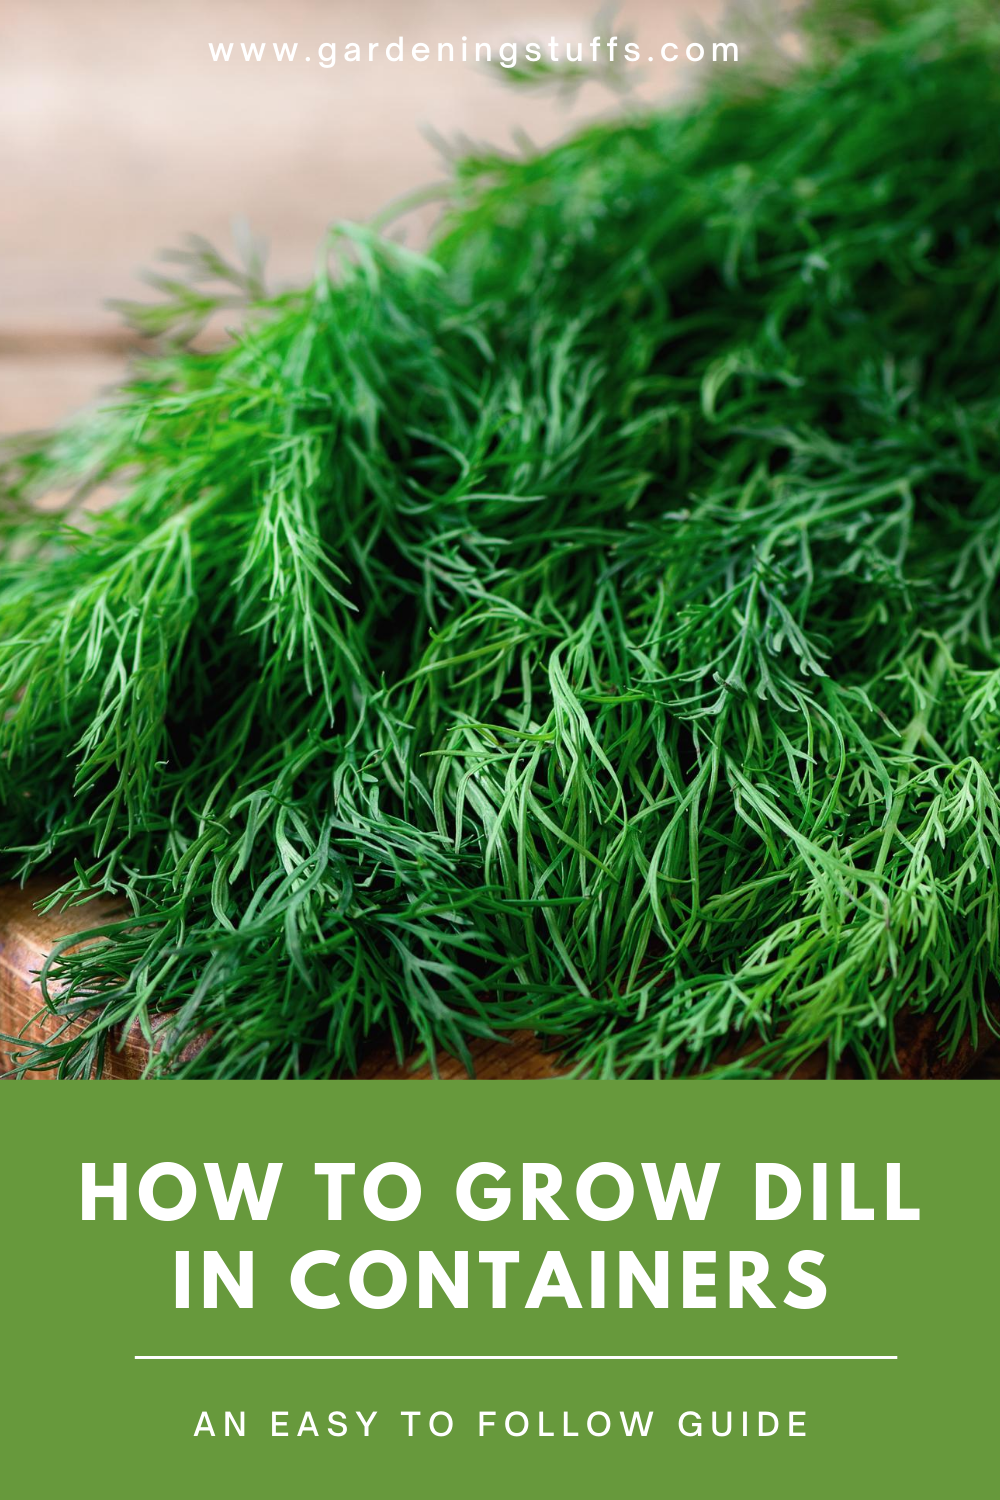 Growing dill in containers is easy. You can do both indoors or outdoors, as long as there’s sufficient sunlight. Learn more about how to plant, grow, care for, and harvest dill in your garden so you can enjoy your favourite dip sauce or other dishes.